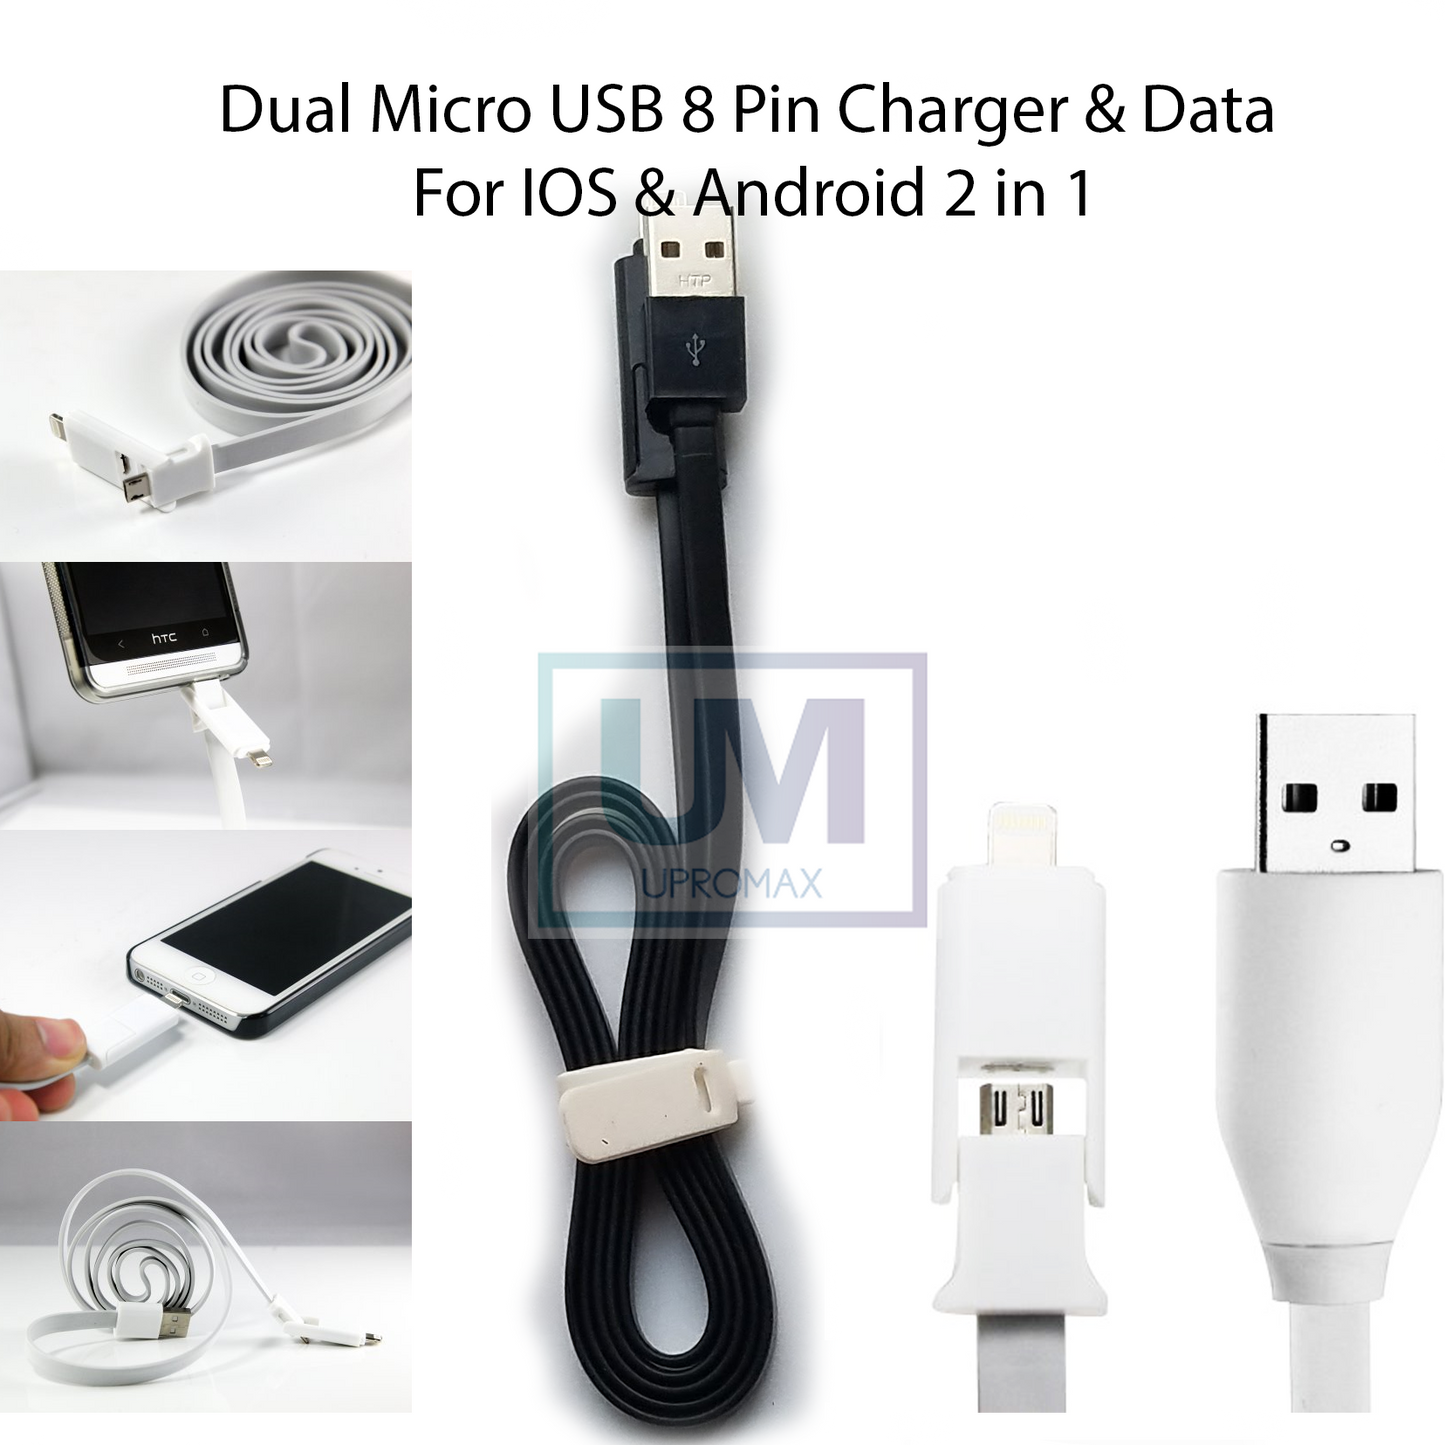 Dual Micro USB Lightning 3 Ft Cable 2-In-1 Charging And Data Sync IOS - UproMax